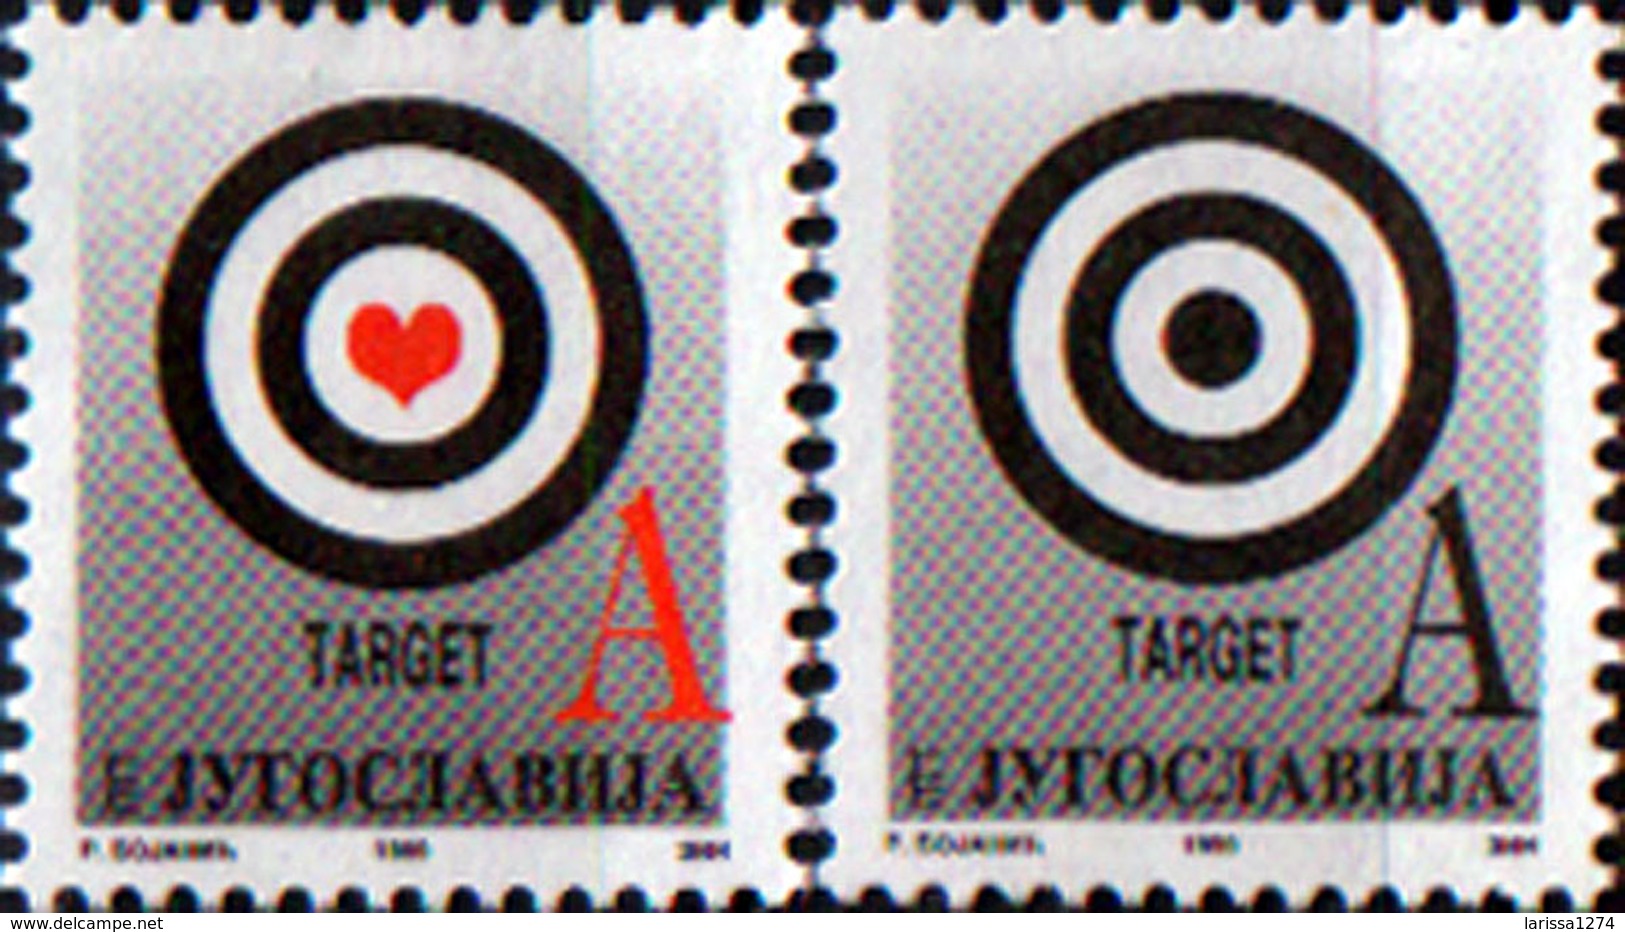 YUGOSLAVIA 1999 Definitive Target Face Value “A” Set MNH - Full Years